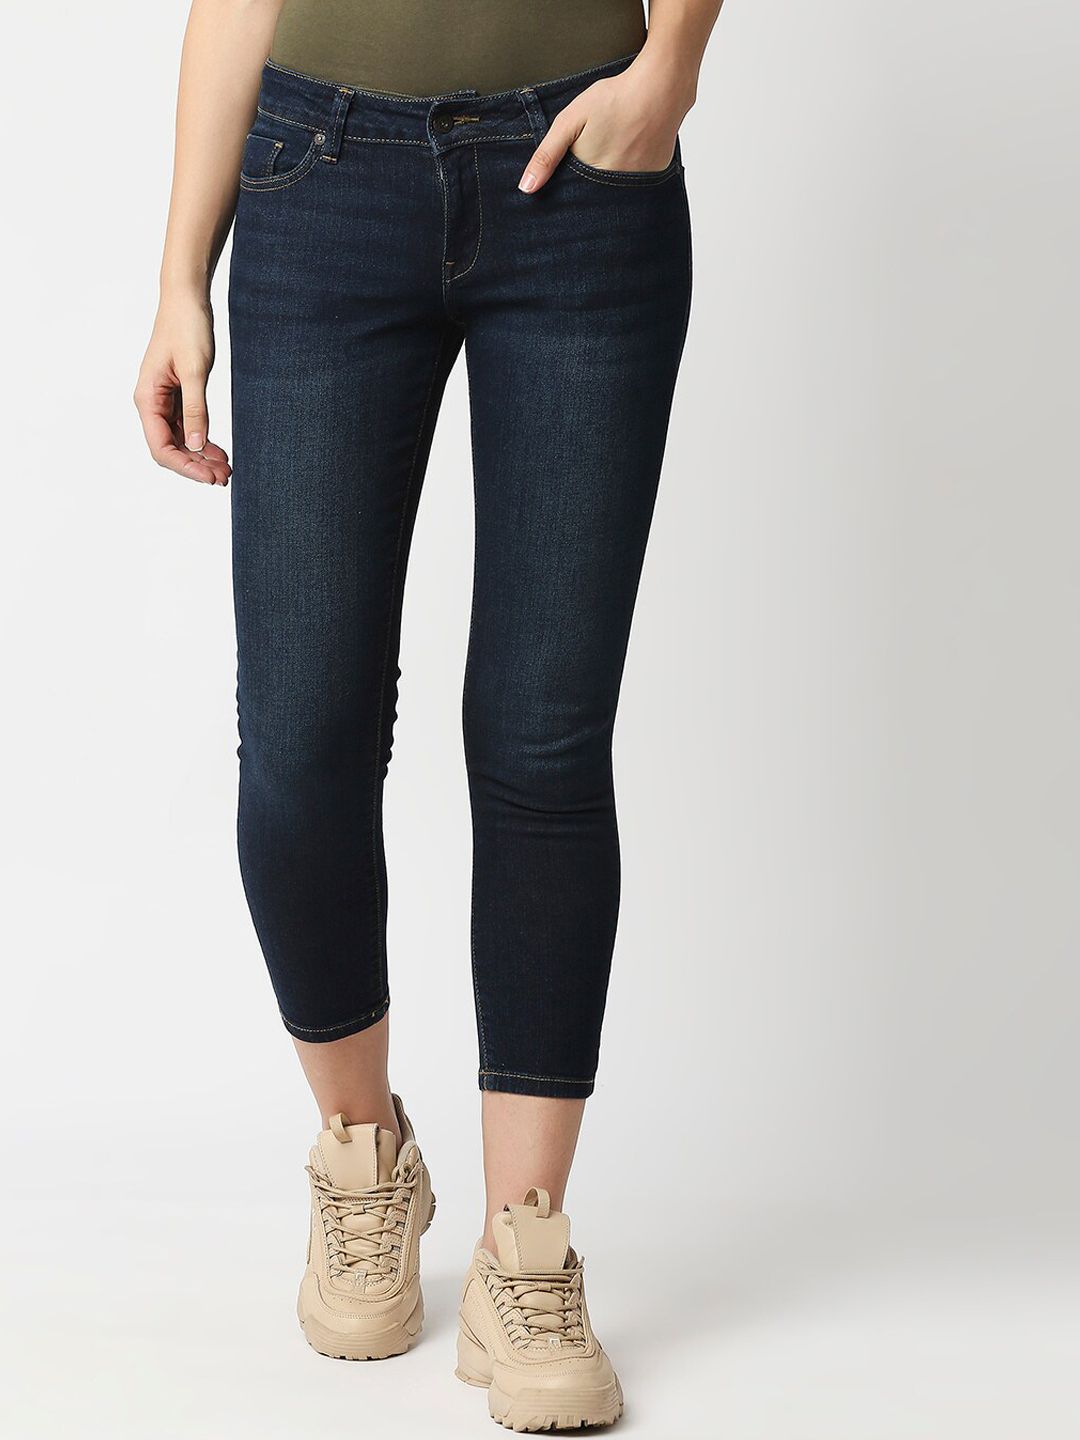 Pepe Jeans Women Blue Skinny Fit Light Fade Jeans Price in India